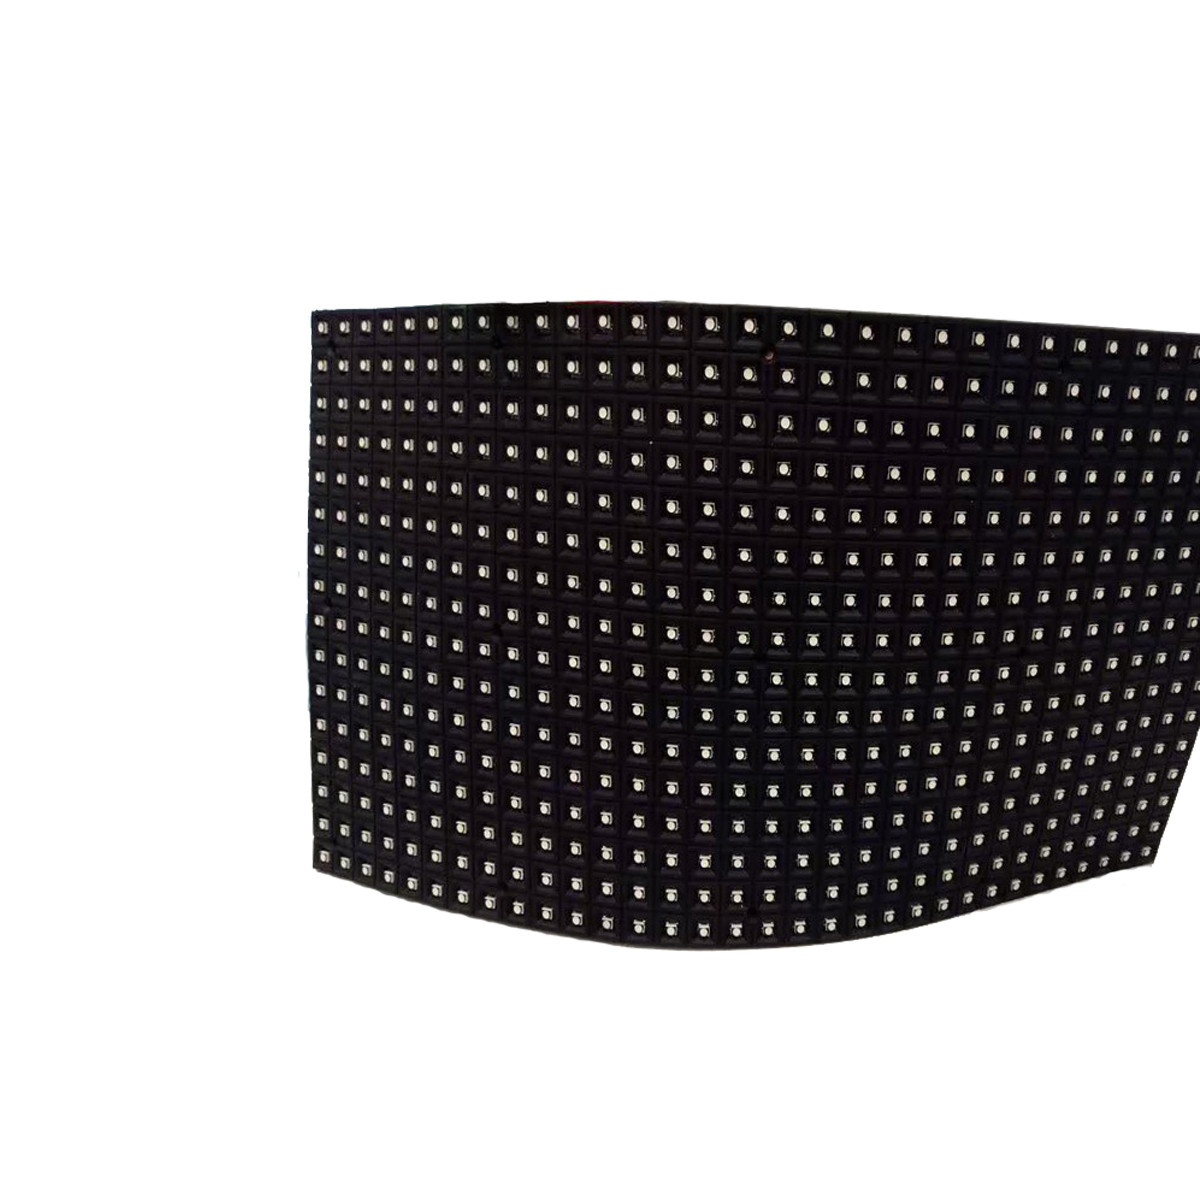 P3 Silicon Flexible SMD LED Display Module 240*120mm 3m Viewing Distance 800cd/㎡ Brightness 1920HZ Refresh Frequency